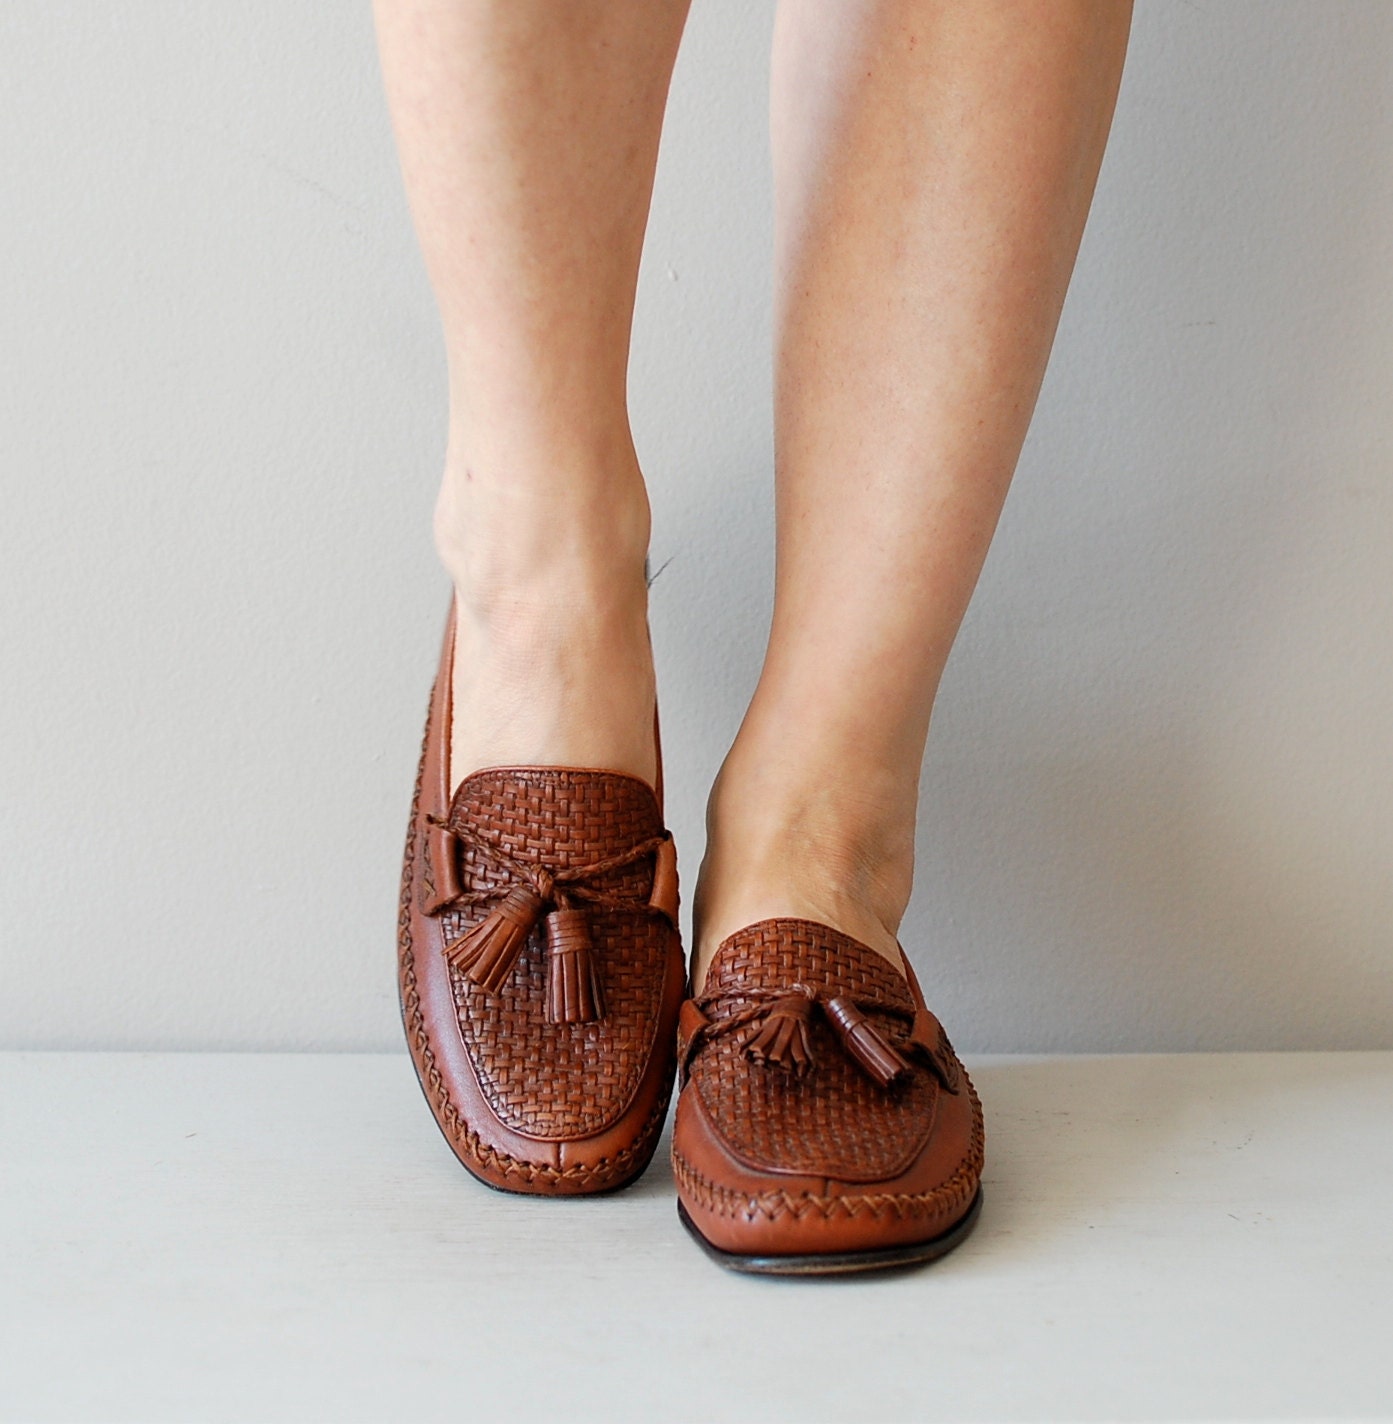 tassel loafers / woven leather loafers / Cole Haan loafers